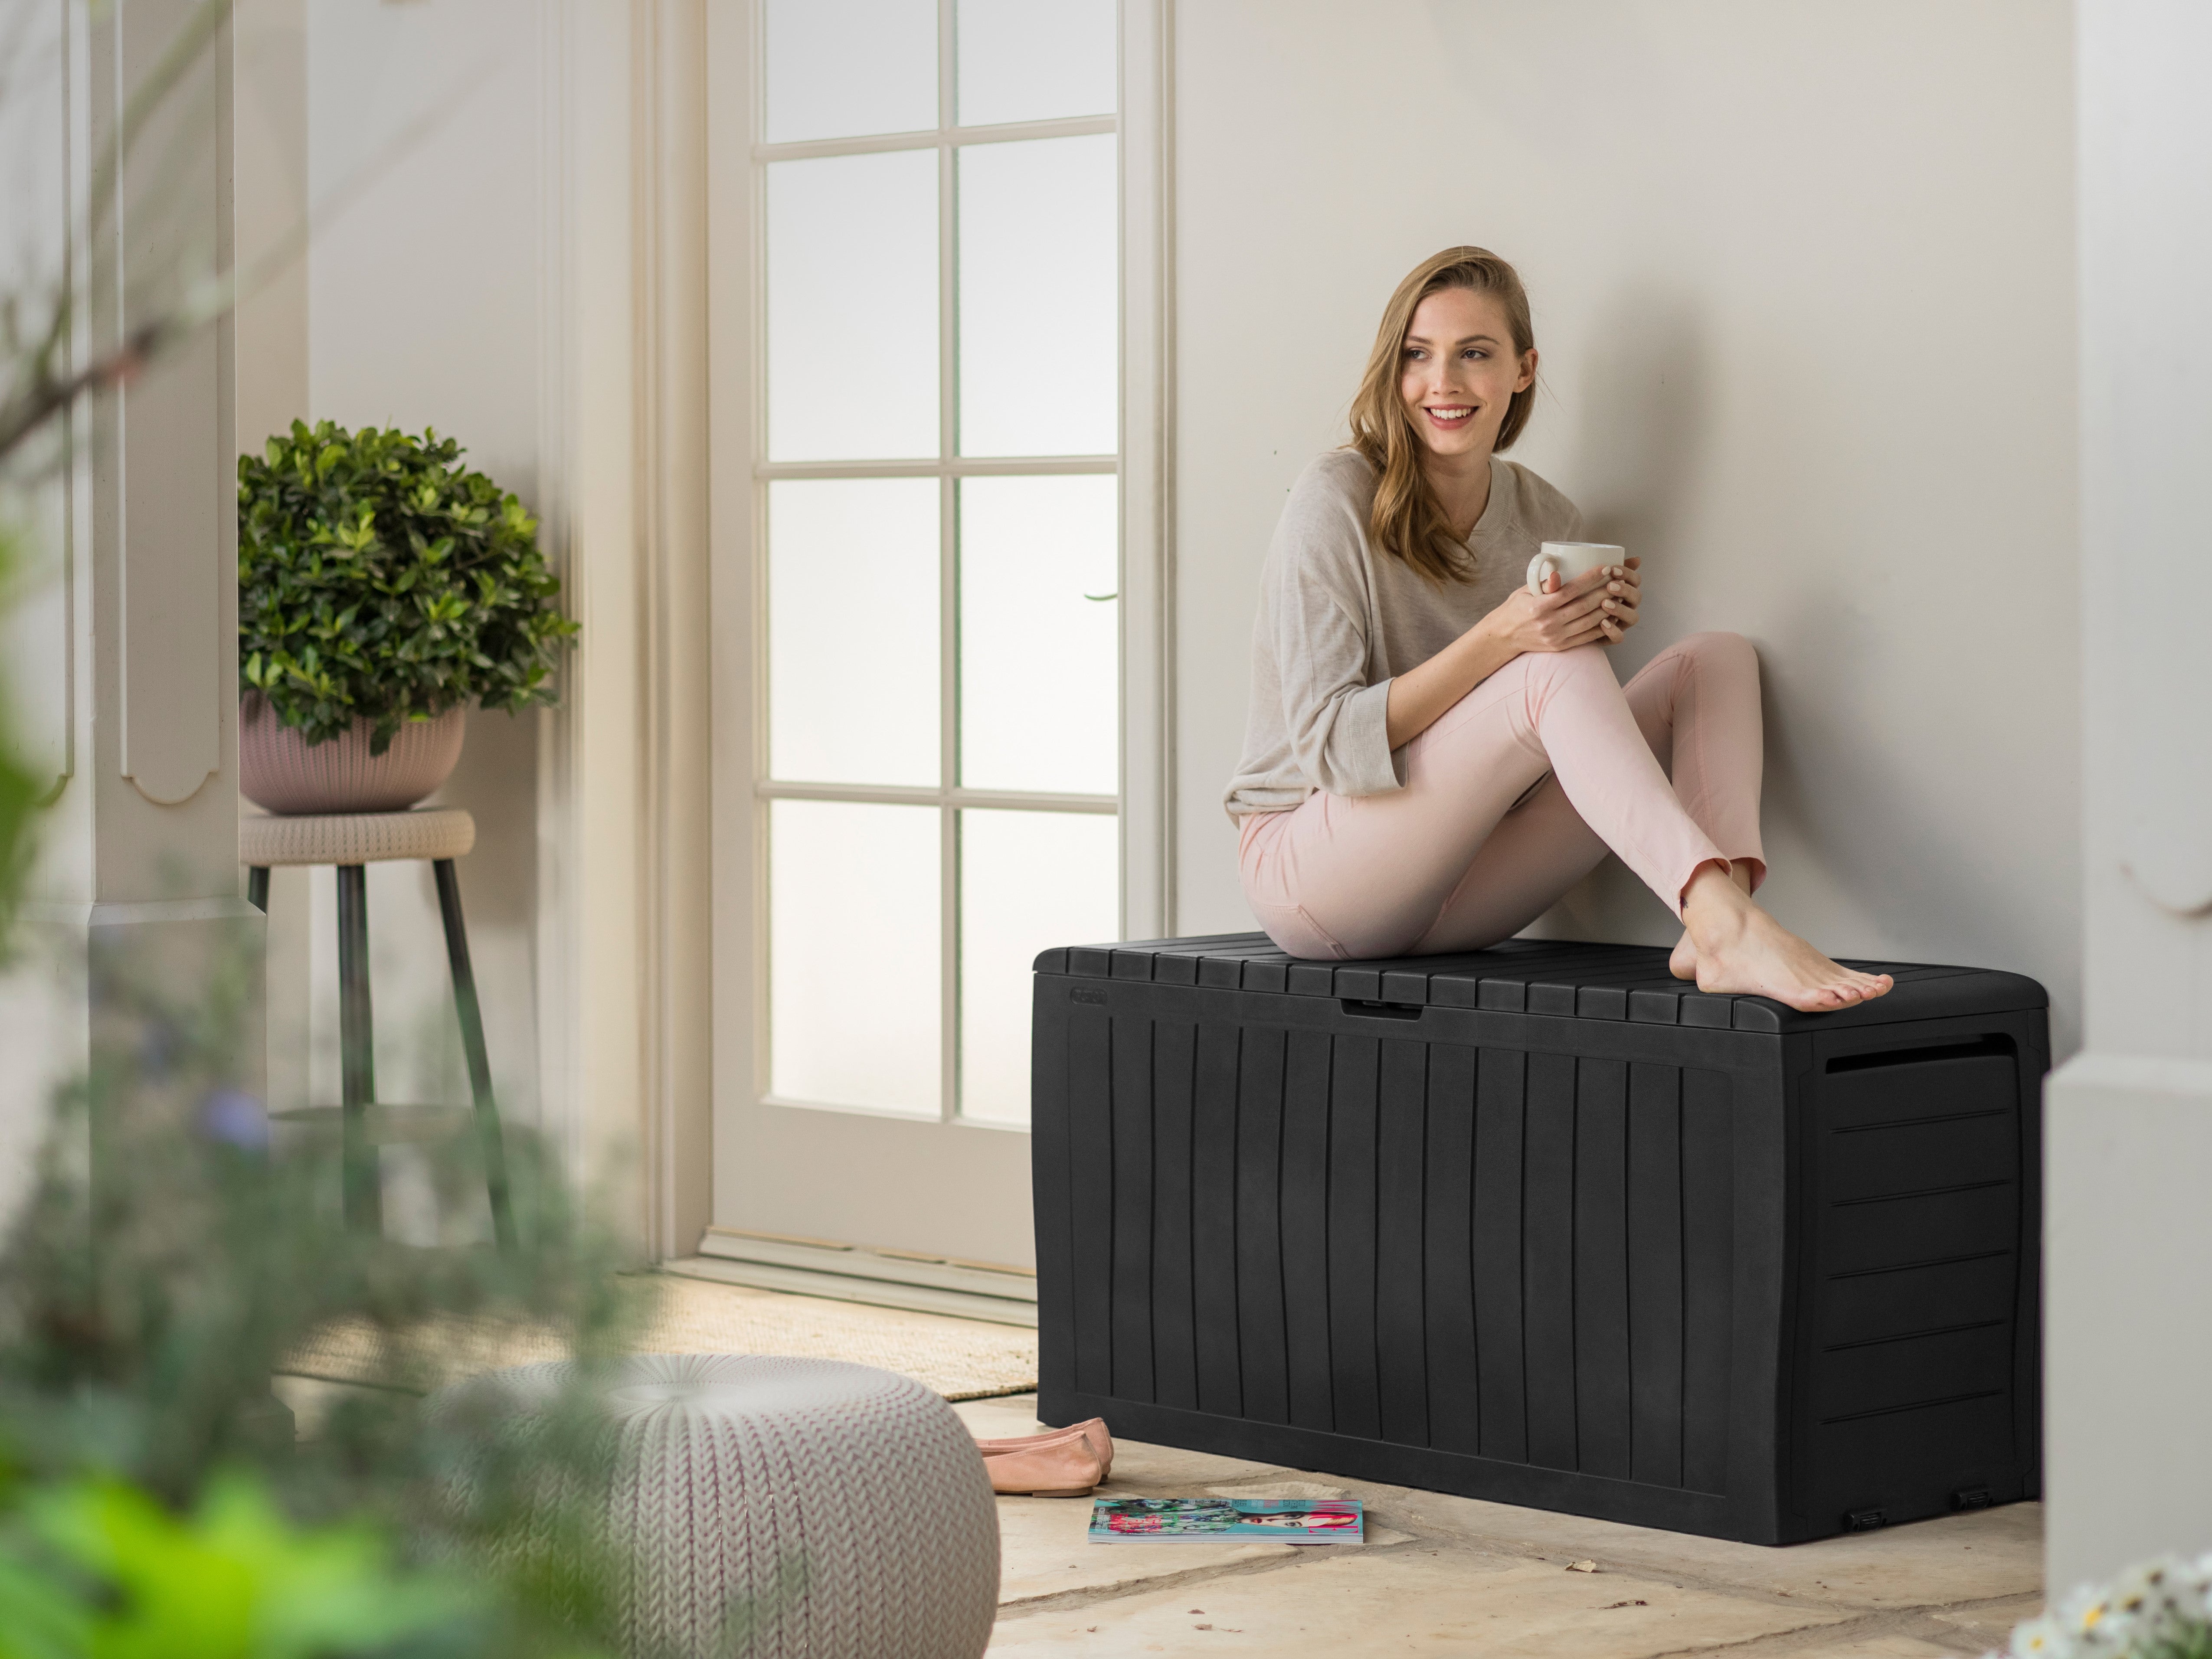 Keter Marvel storage box with woman sitting on lid